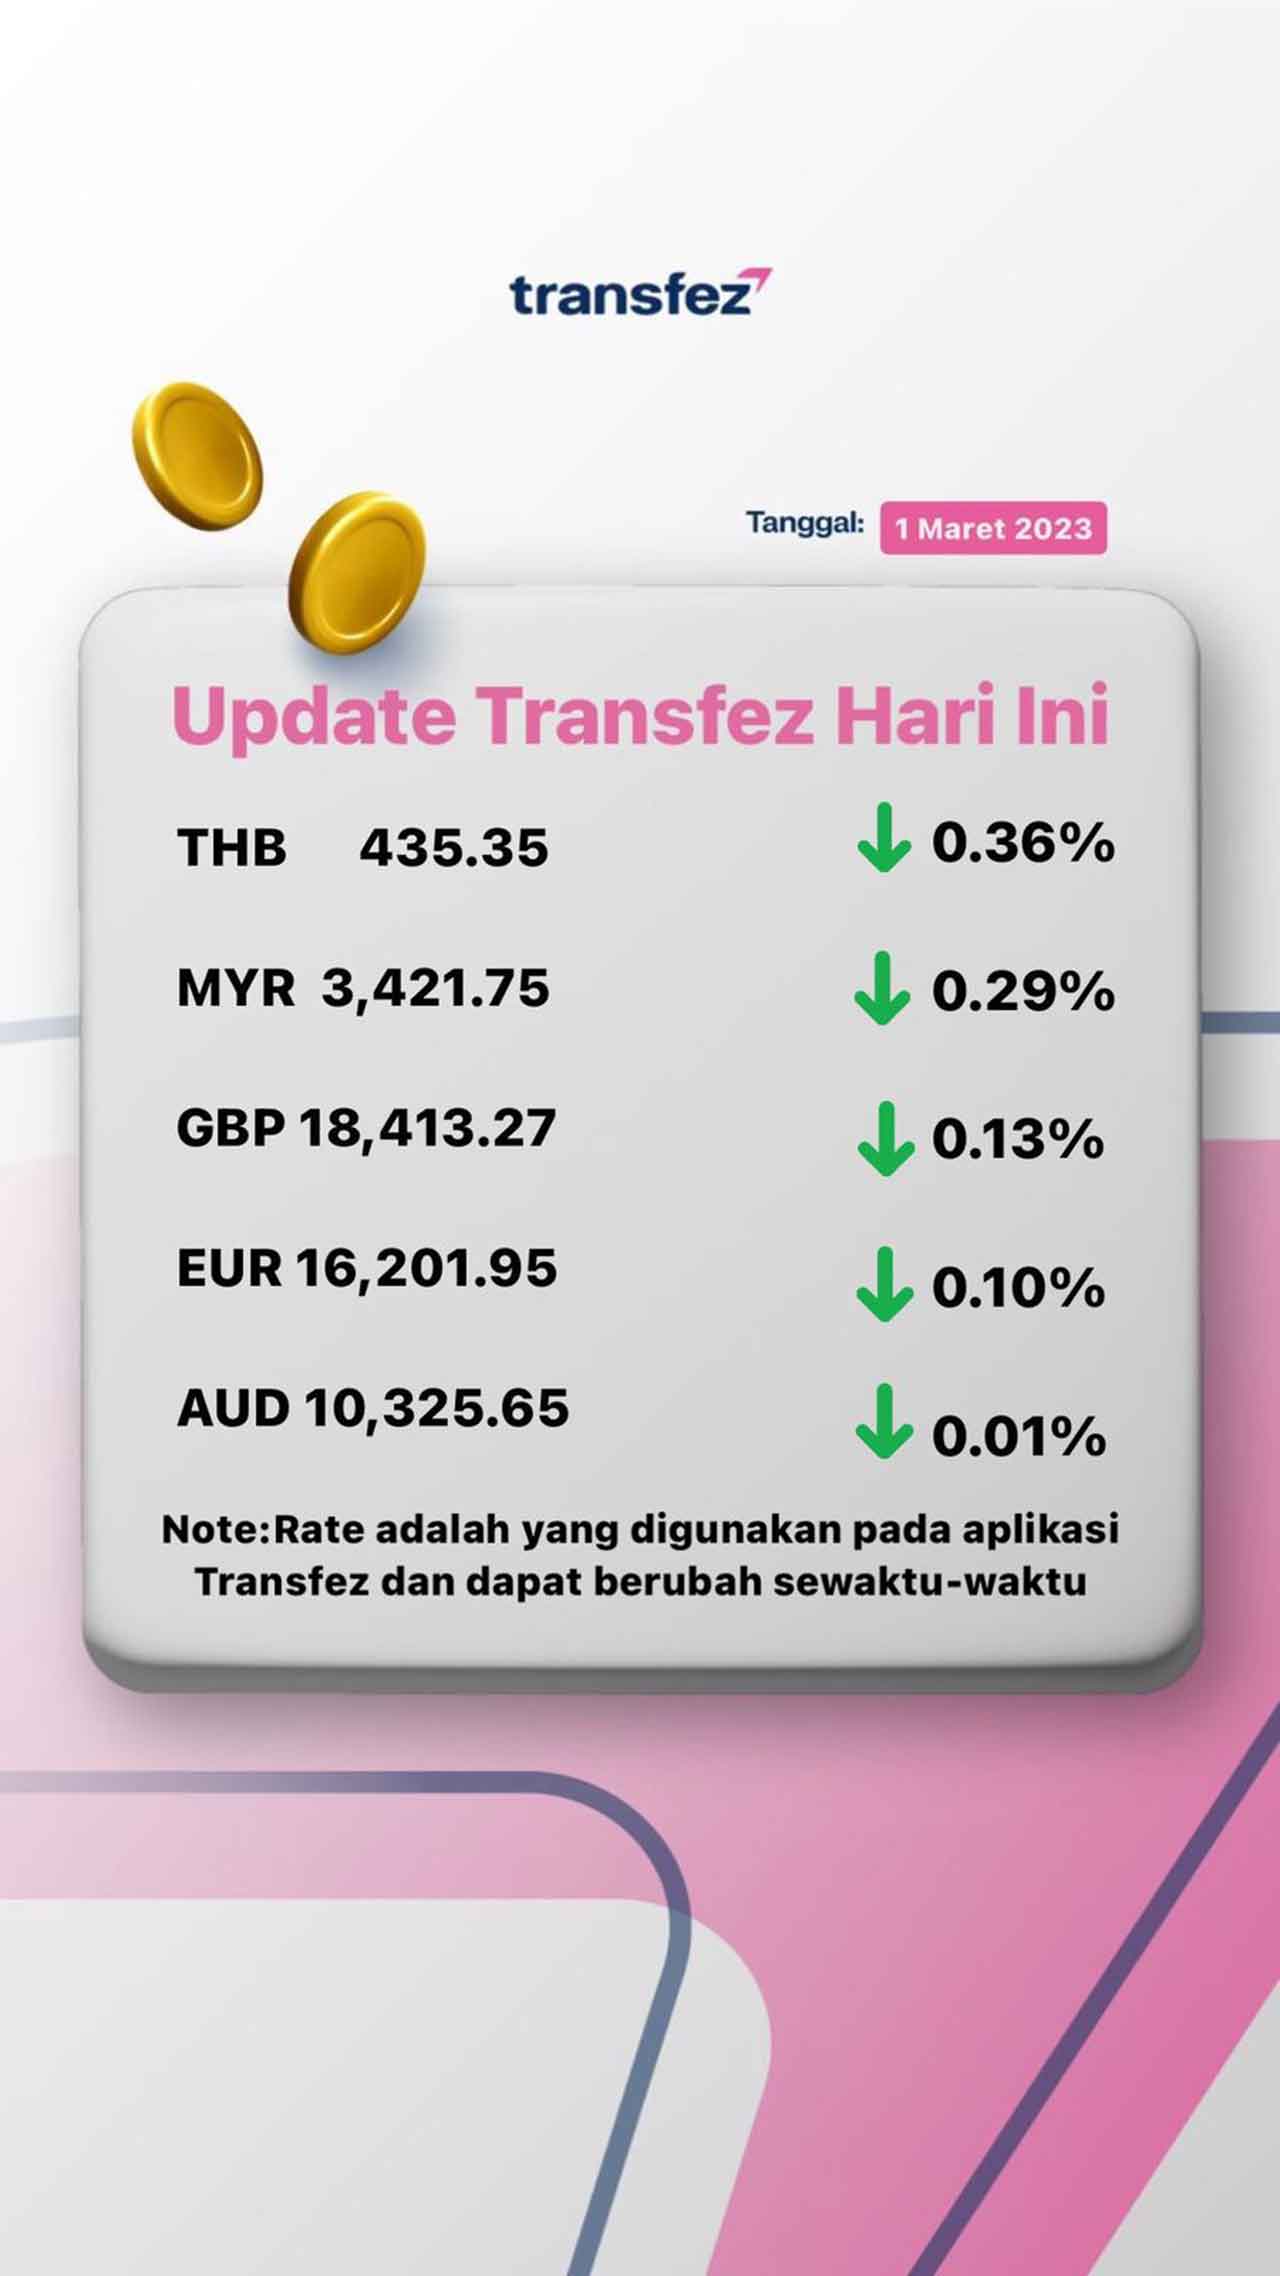 Today's Transfez Rate Update March 01 2023